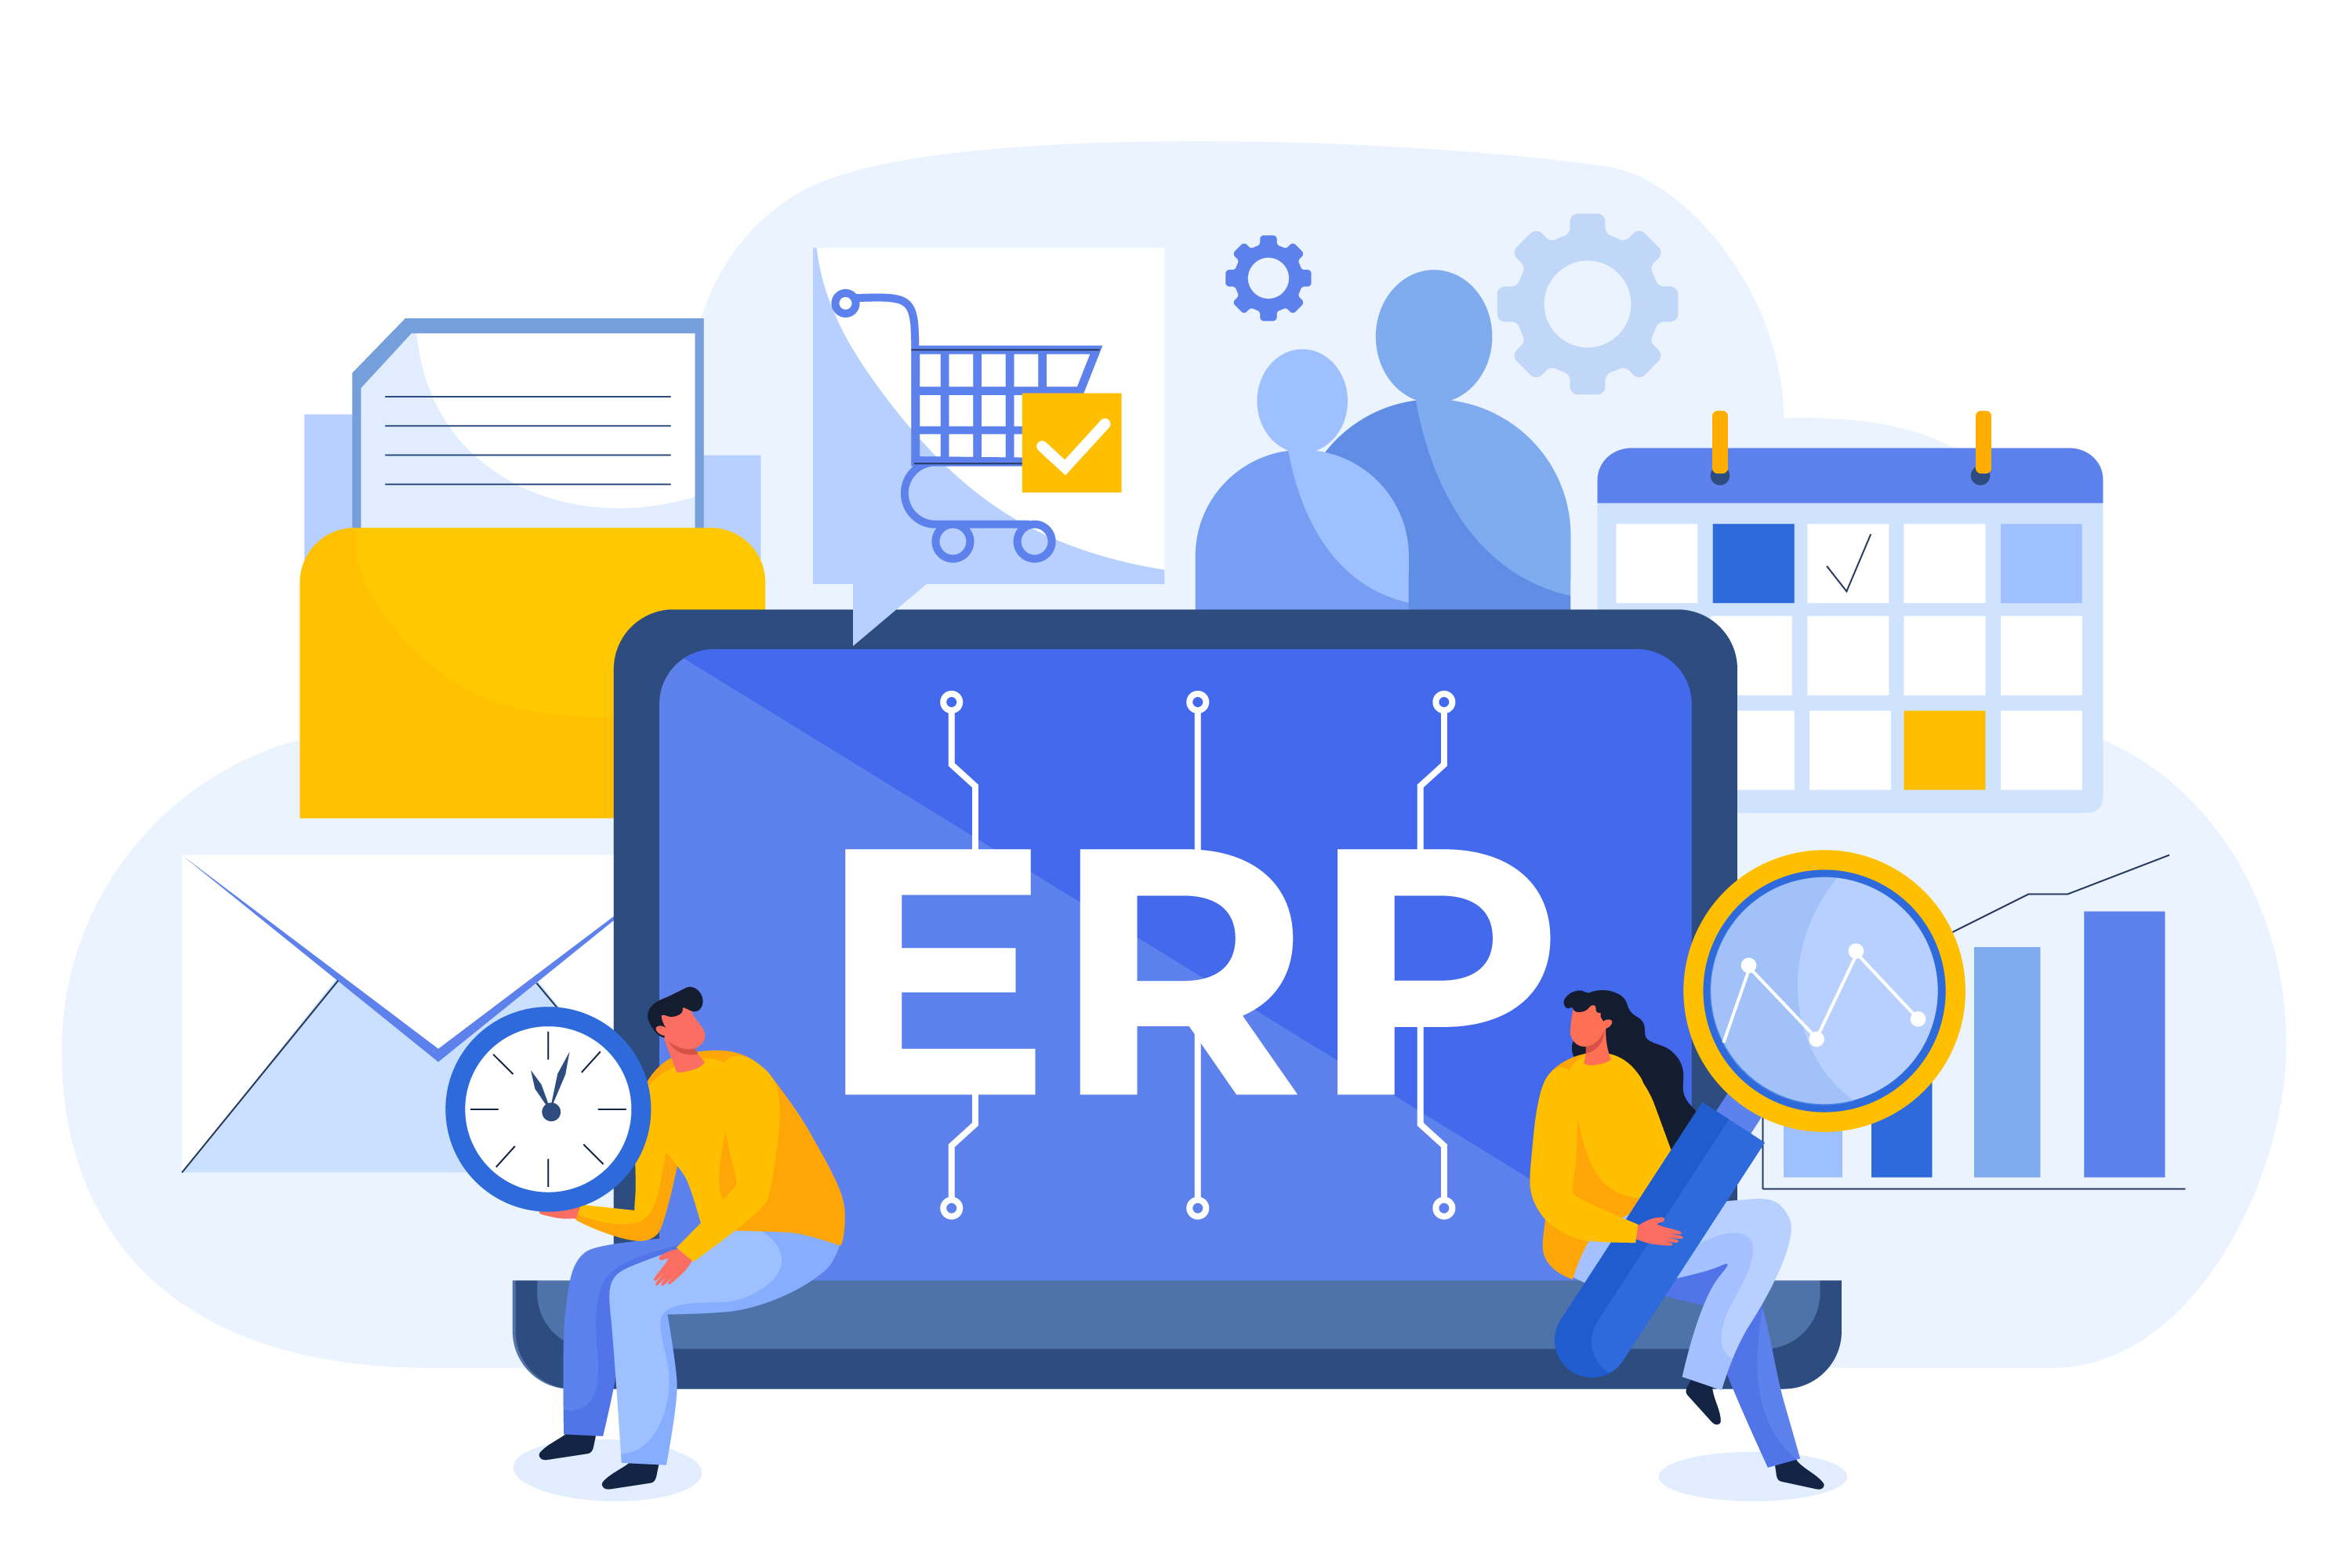 How To Develop ERP Software For Small Businesses?